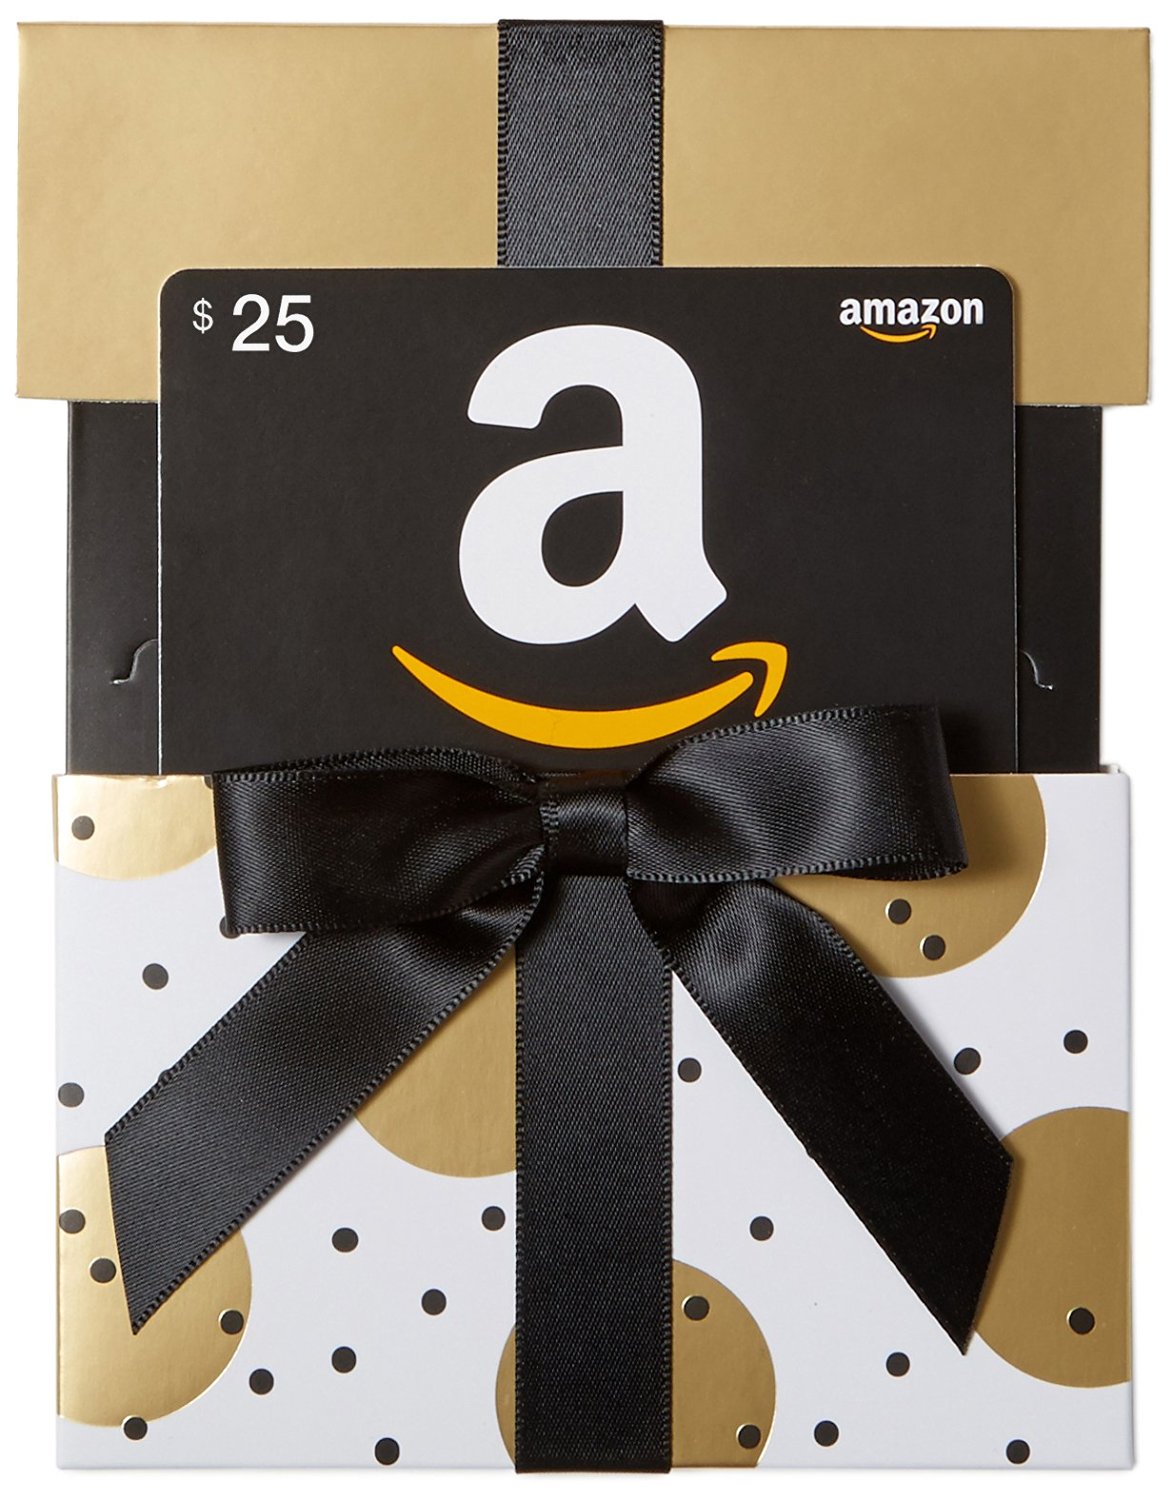 amazon-com-gift-card-in-a-gold-reveal